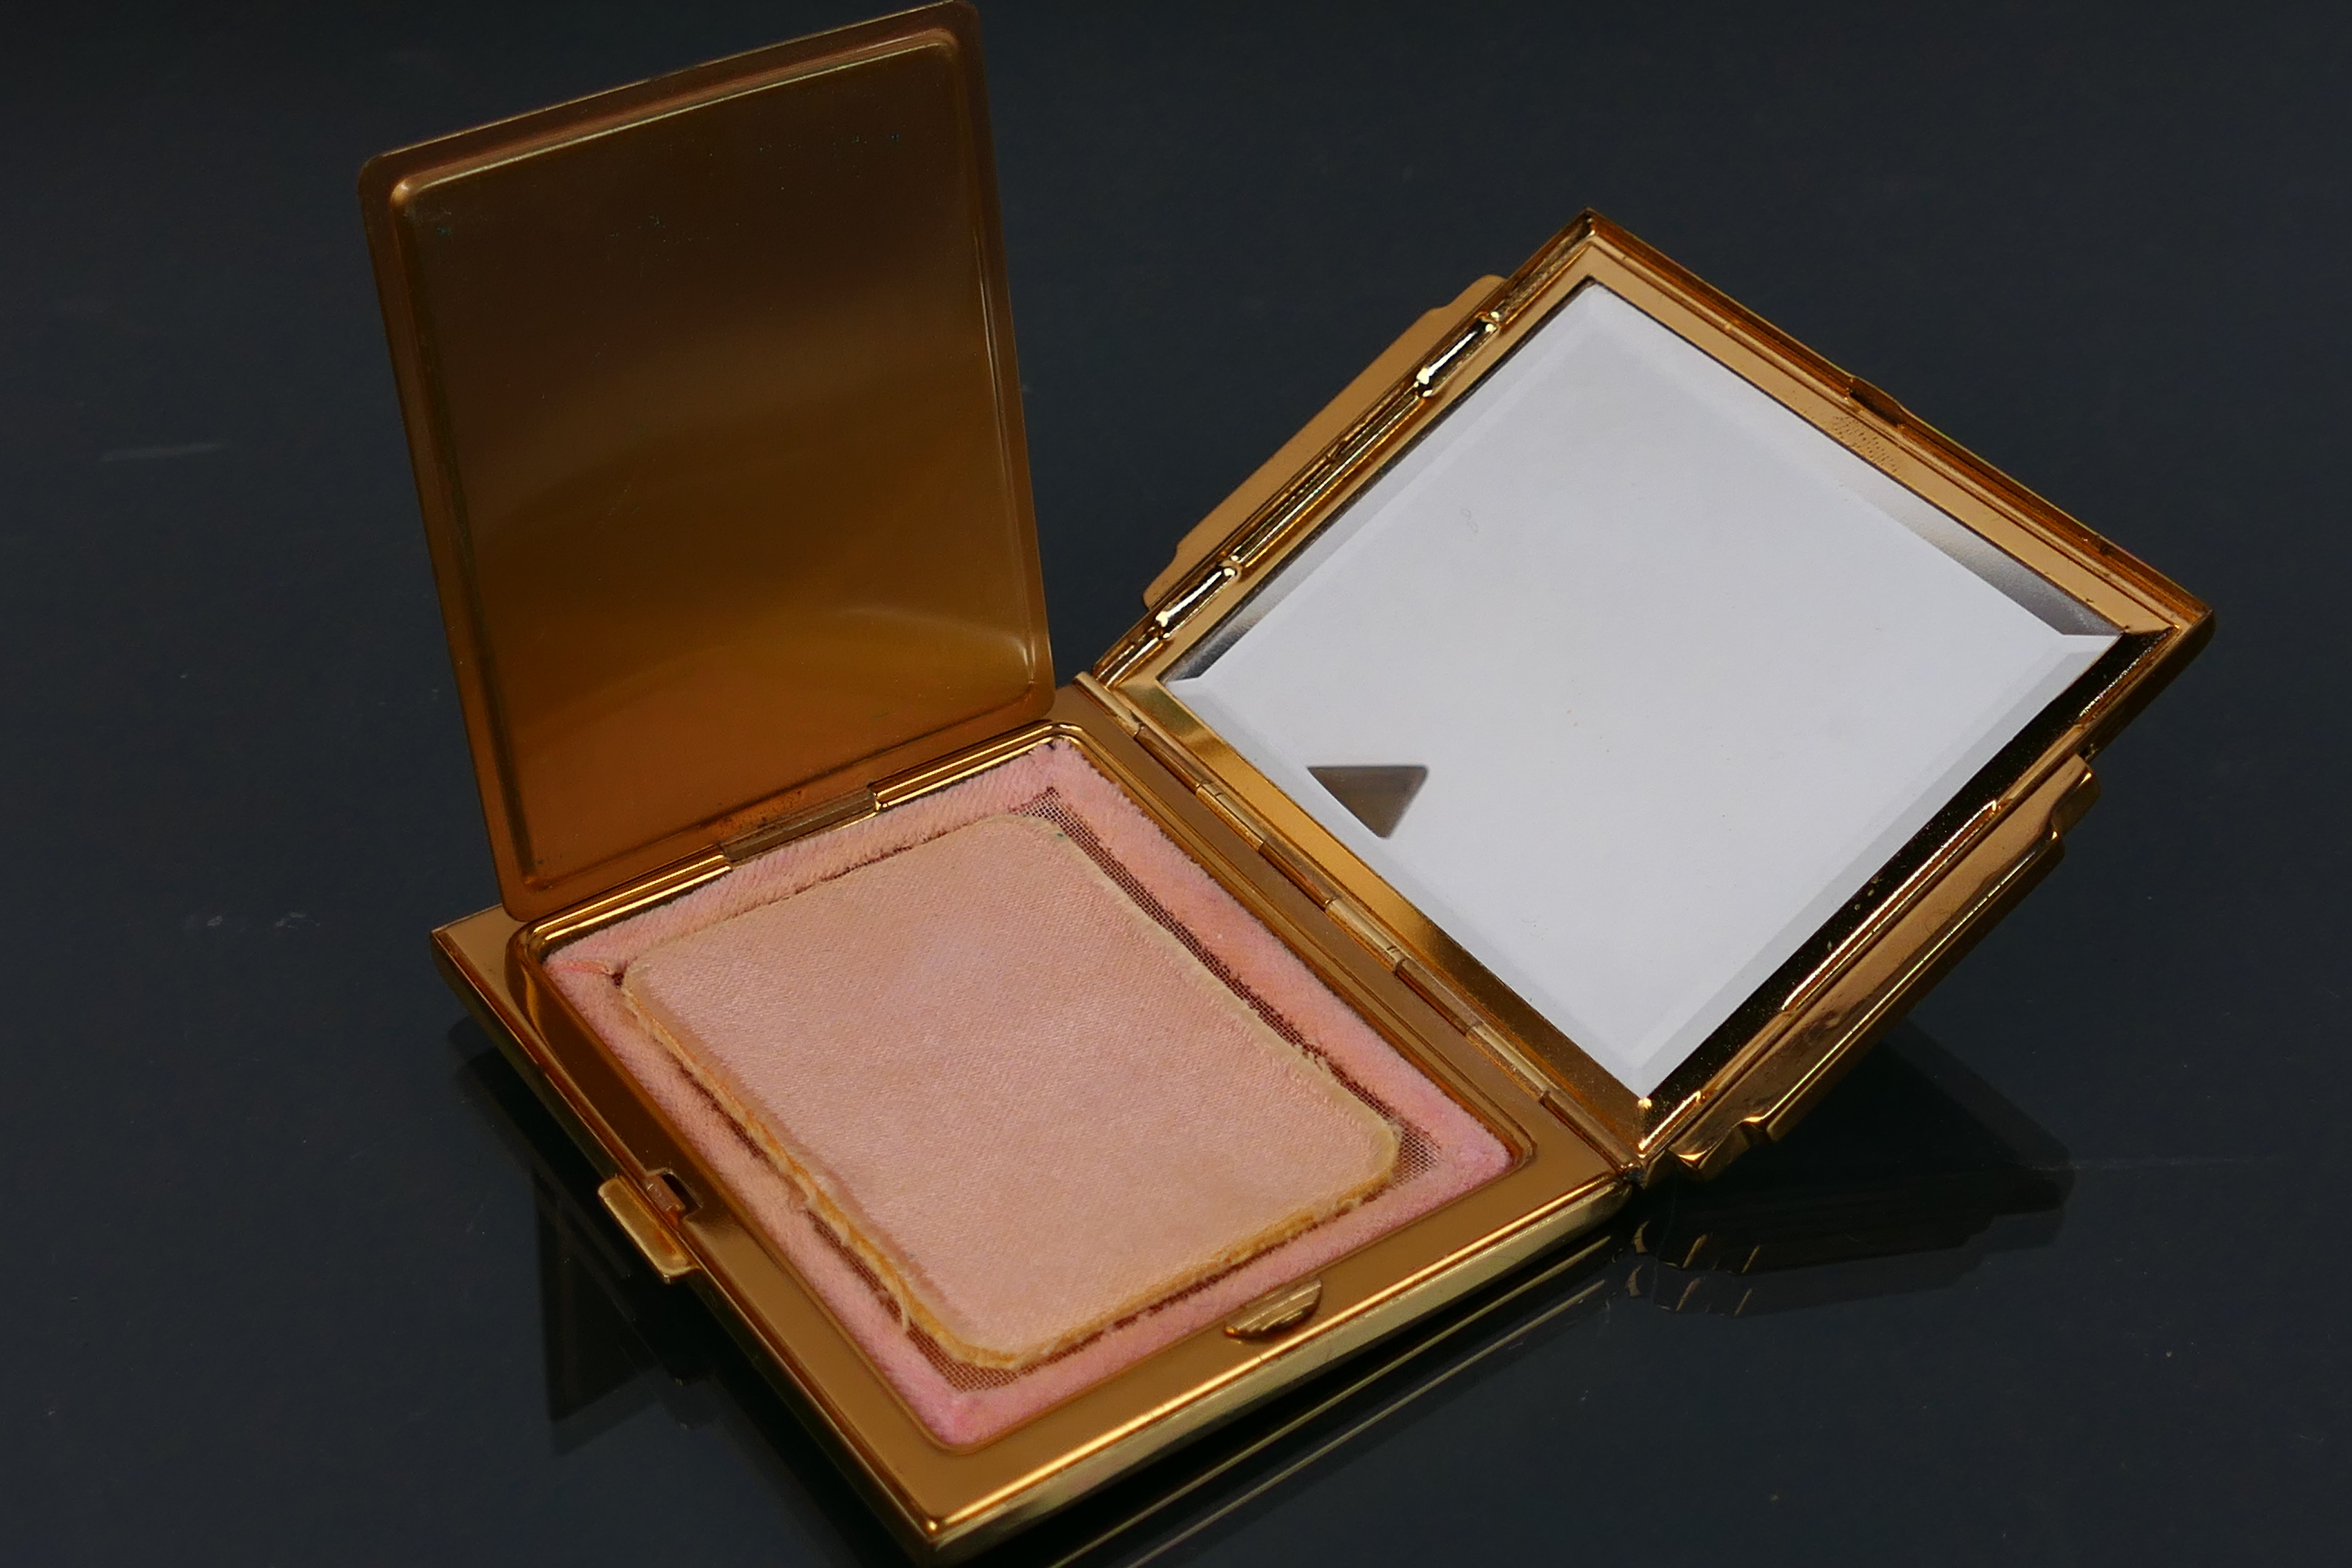 AGME - A mother of pearl faced art deco style powder compact. - Image 7 of 9